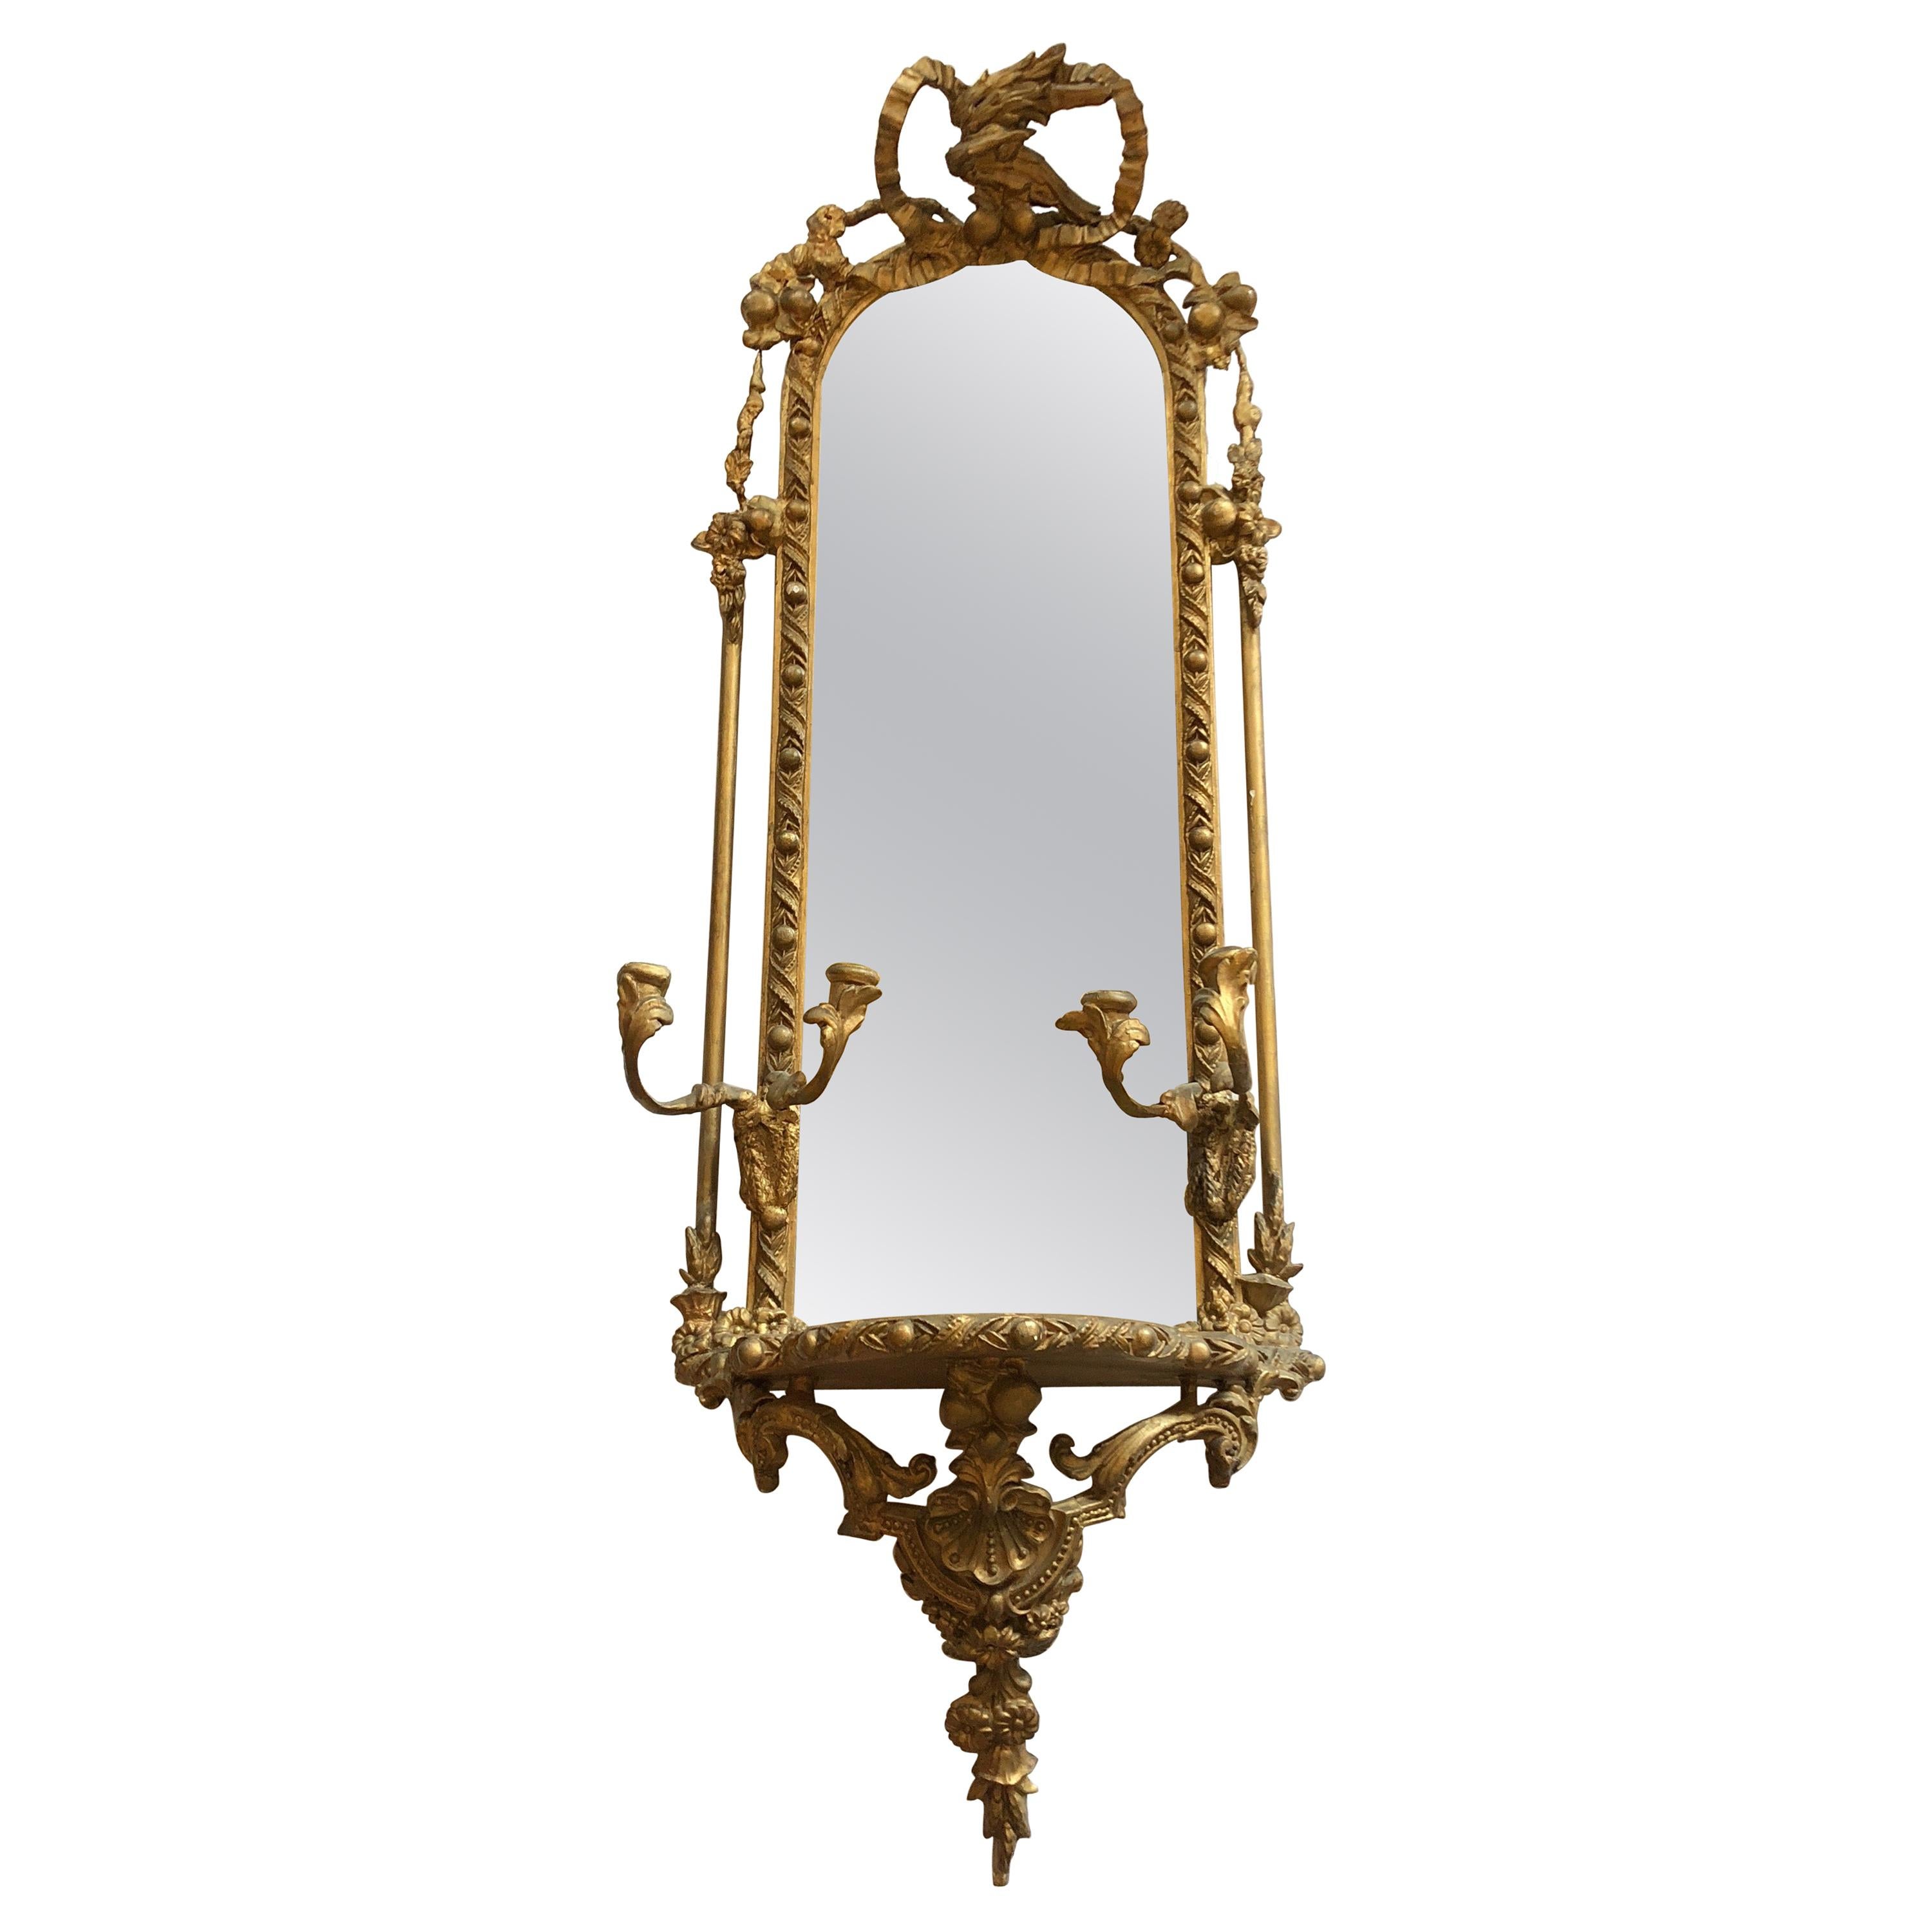 Ornate Elongated Shabby Chic French Mirror with Candleabra